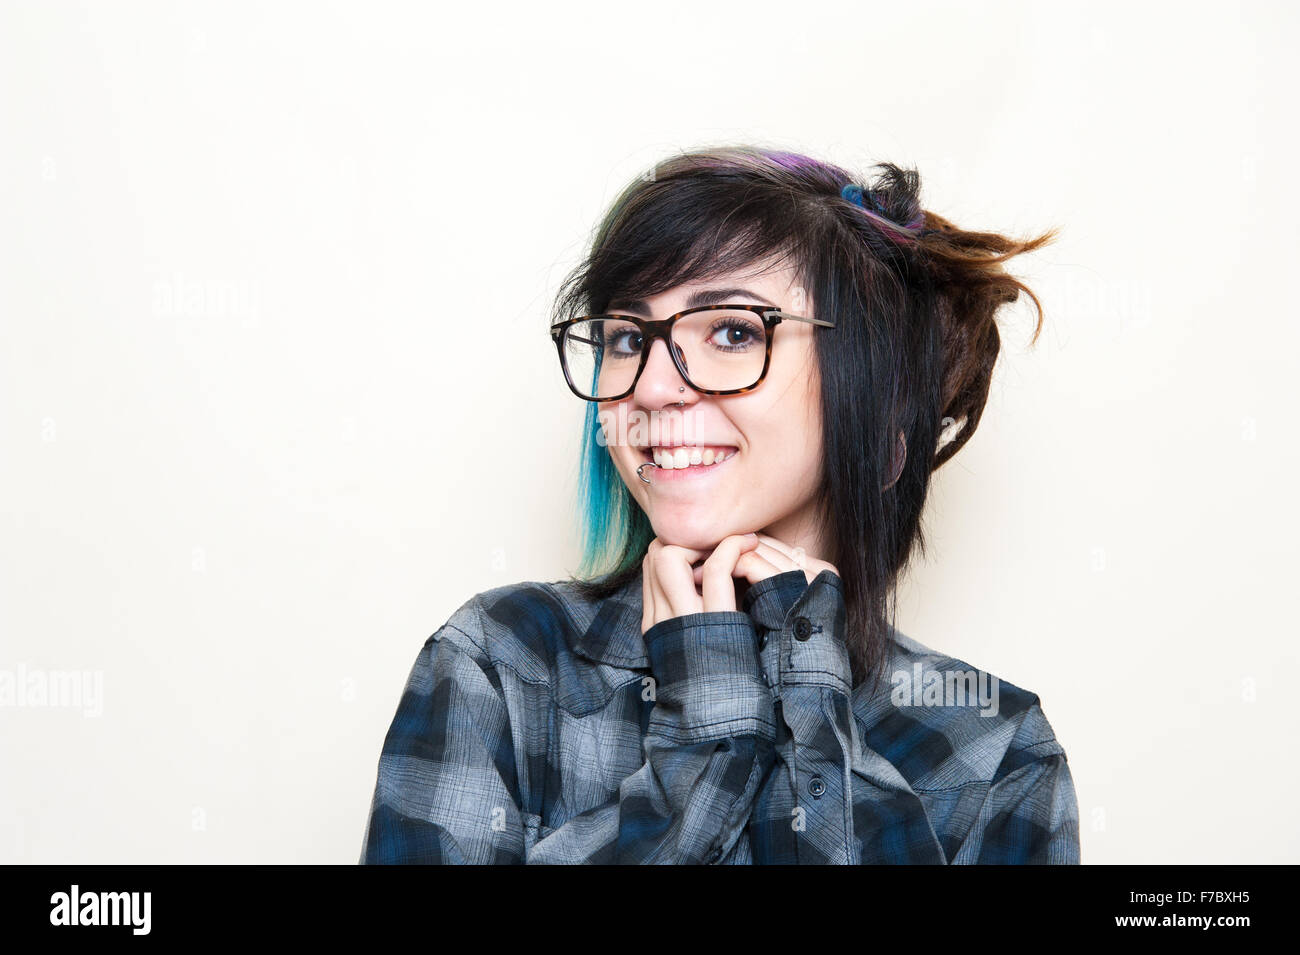 Pretty young alternative teen woman with glasses smiling posing Stock Photo